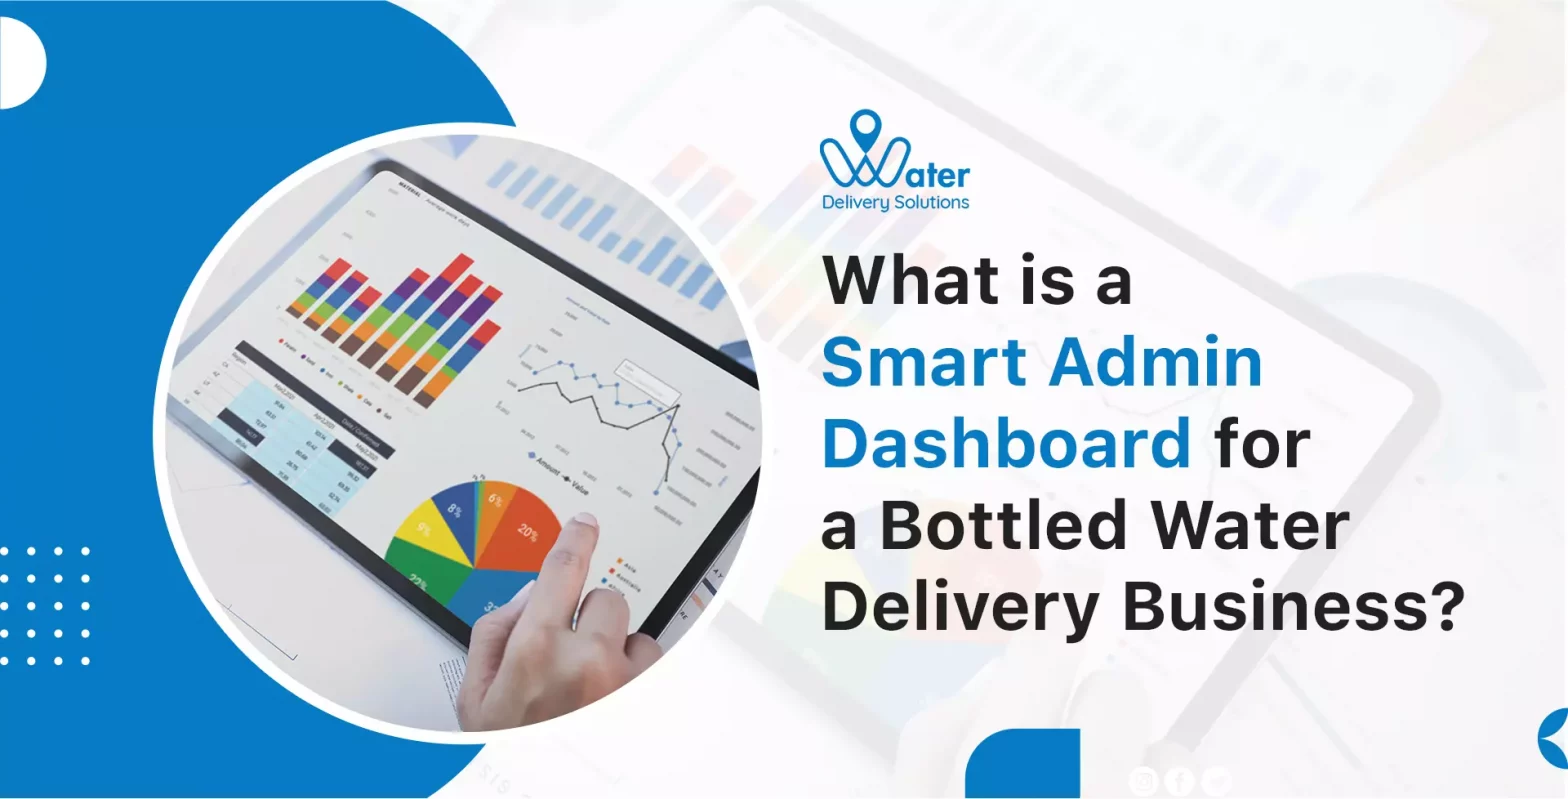 wds-founded-by-ravi-garg-website-insights-what-is-a-smart-admin-dashboard-for-a-bottled-water-delive-100